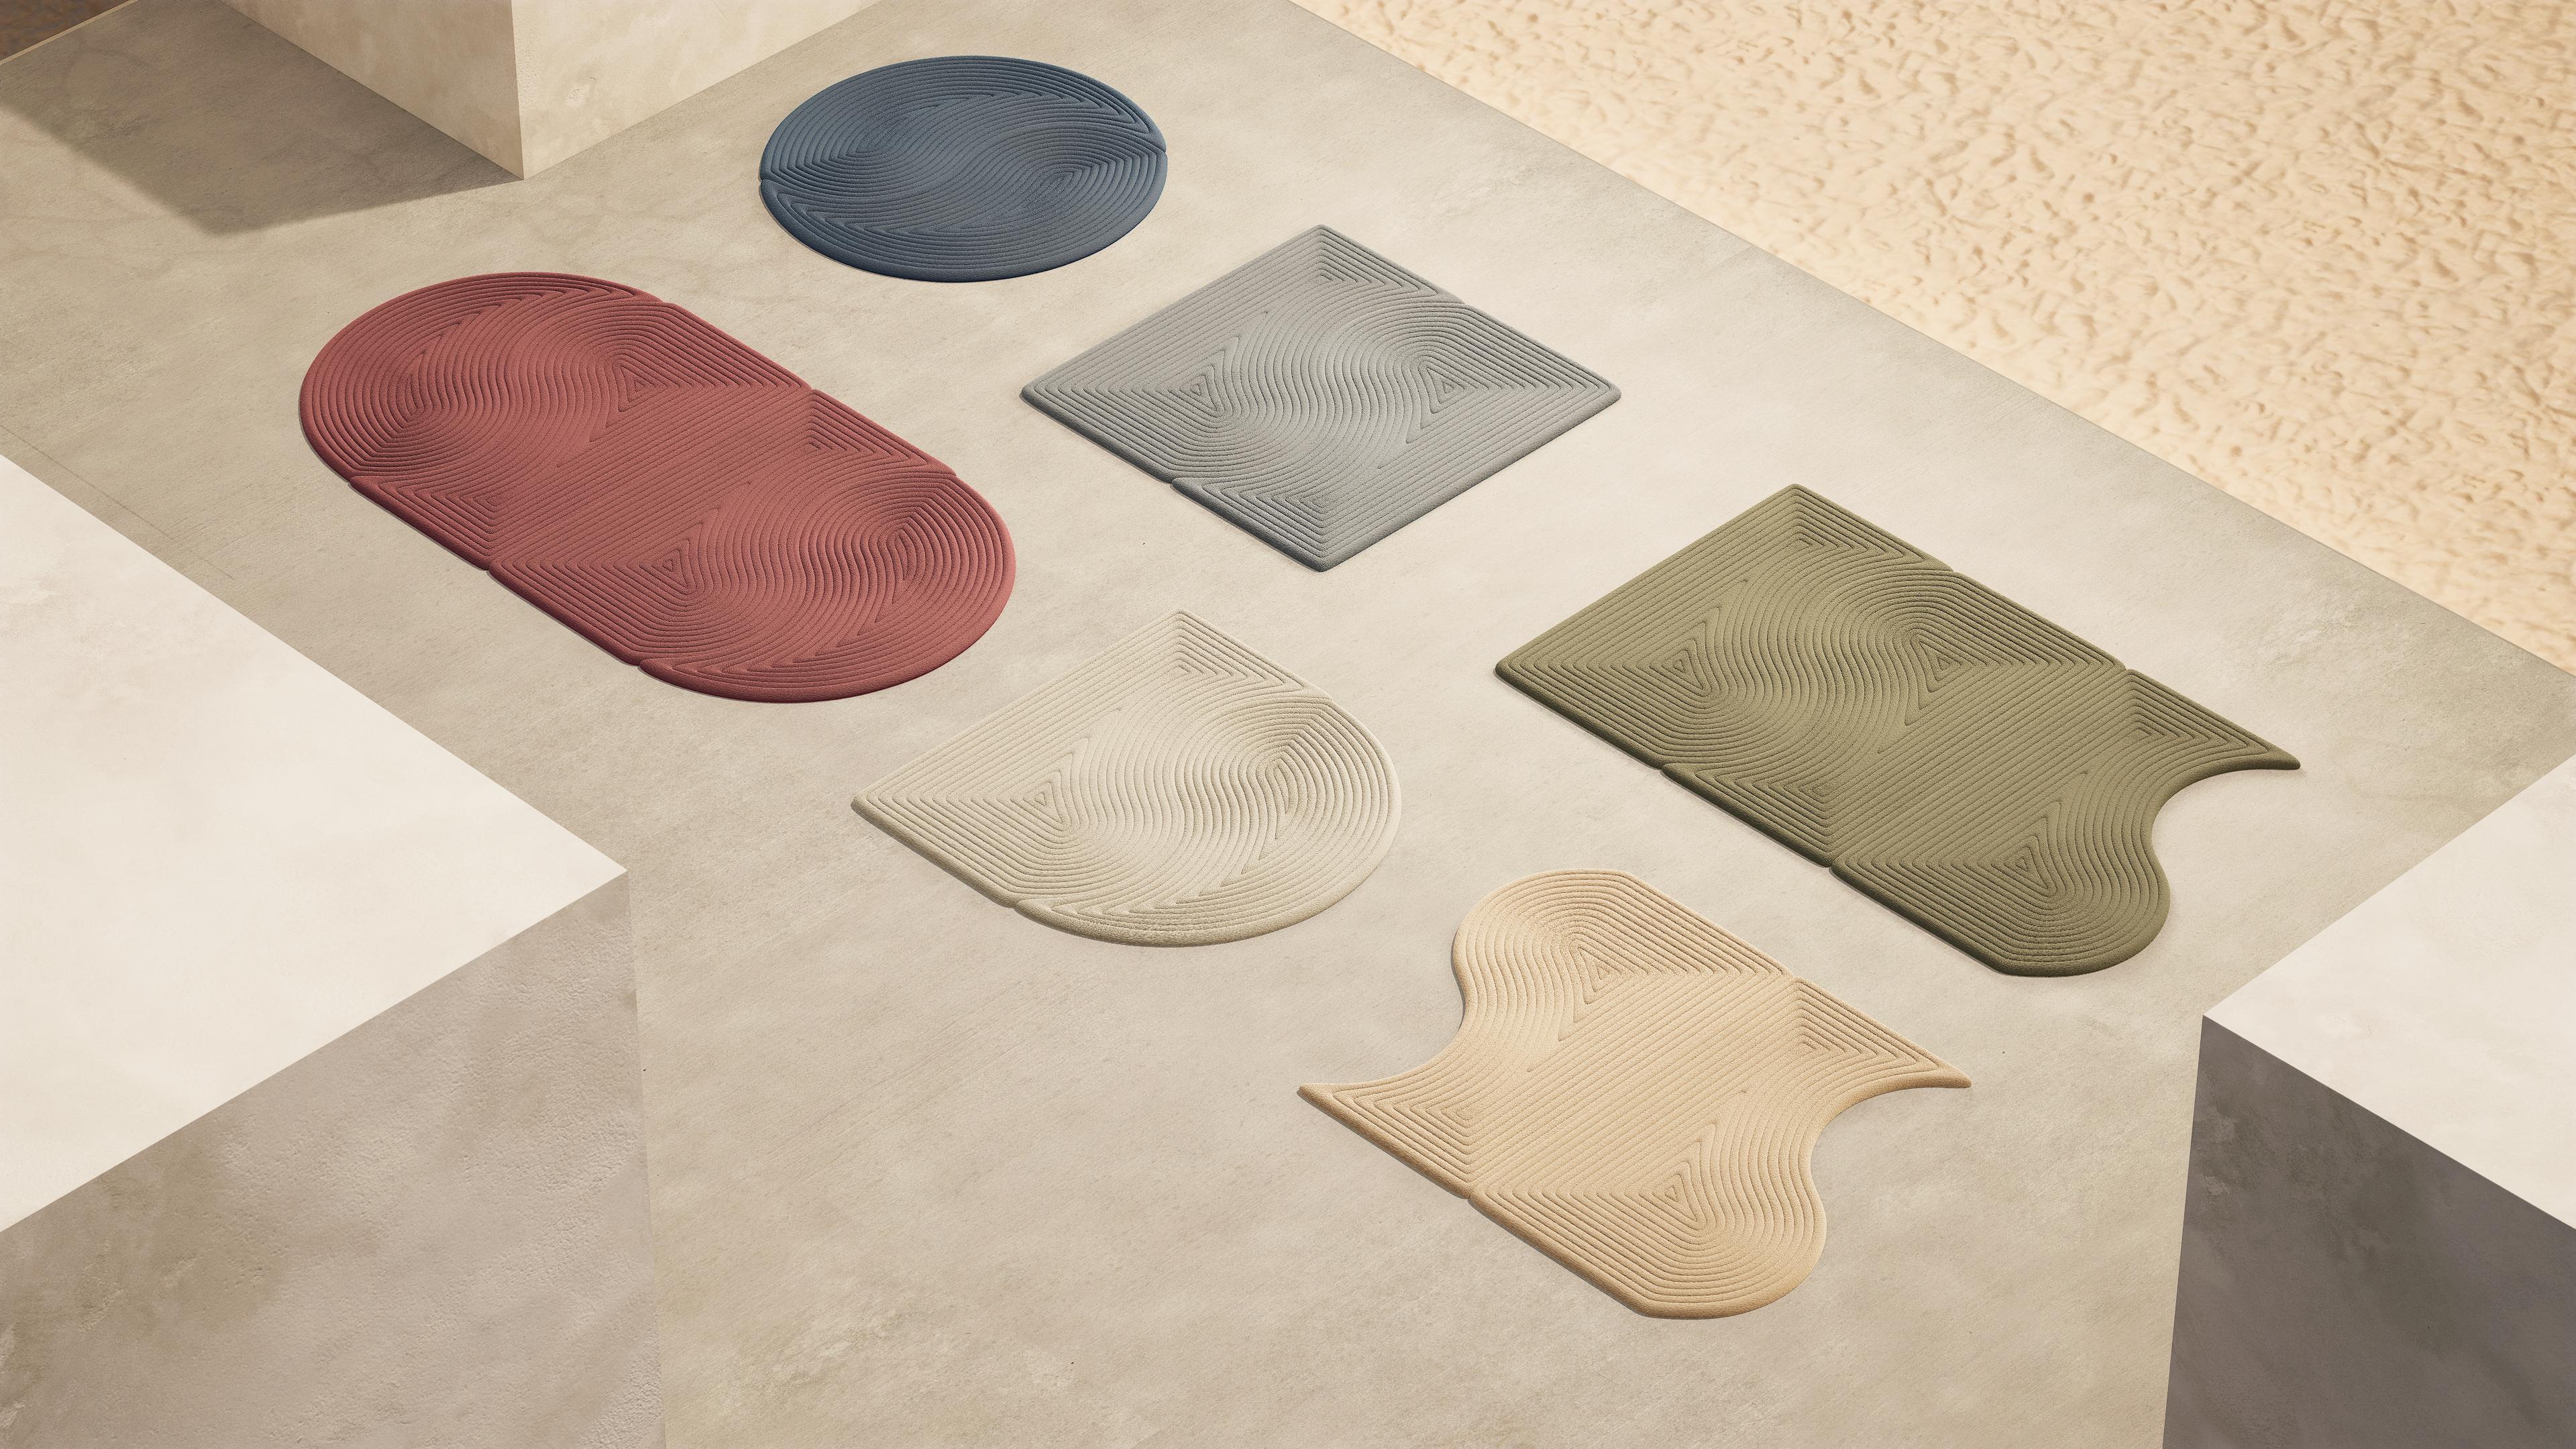 About:
NIWA modular rugs are a representation of the sand element within Zen Gardens. The rugs provide fluidity to the space's atmosphere - via the repetition of the internal pattern, they achieve a feeling of movement and fluidity. At the same